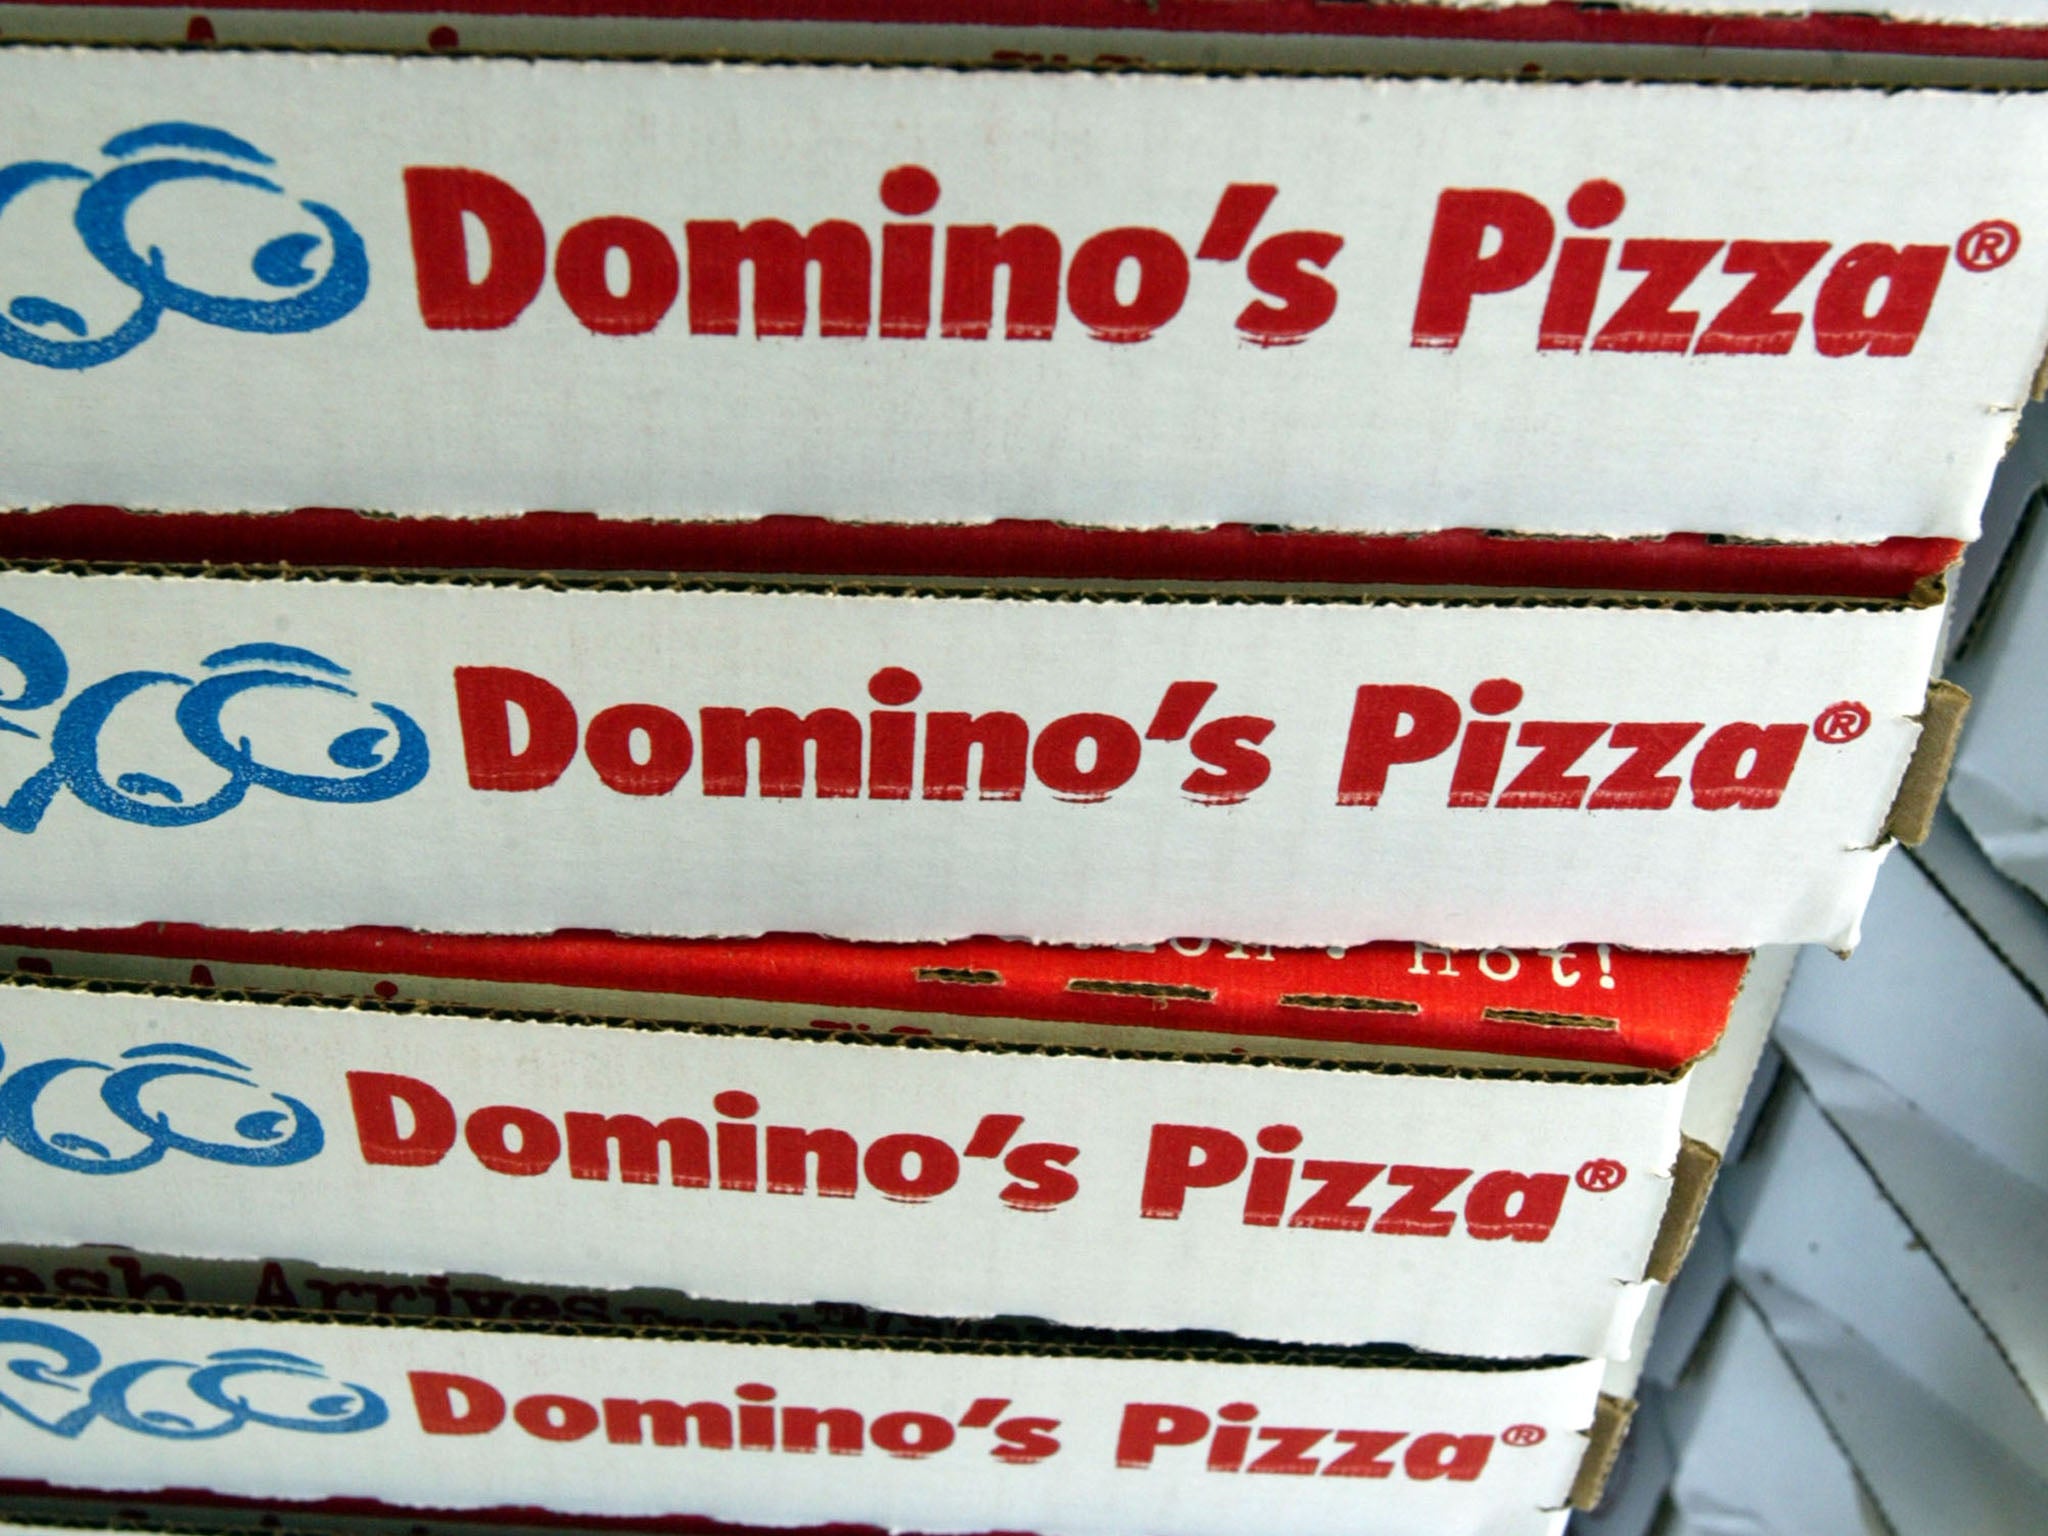 Following an investigation, Domino's Pizza dismissed the driver 'with immediate effect'